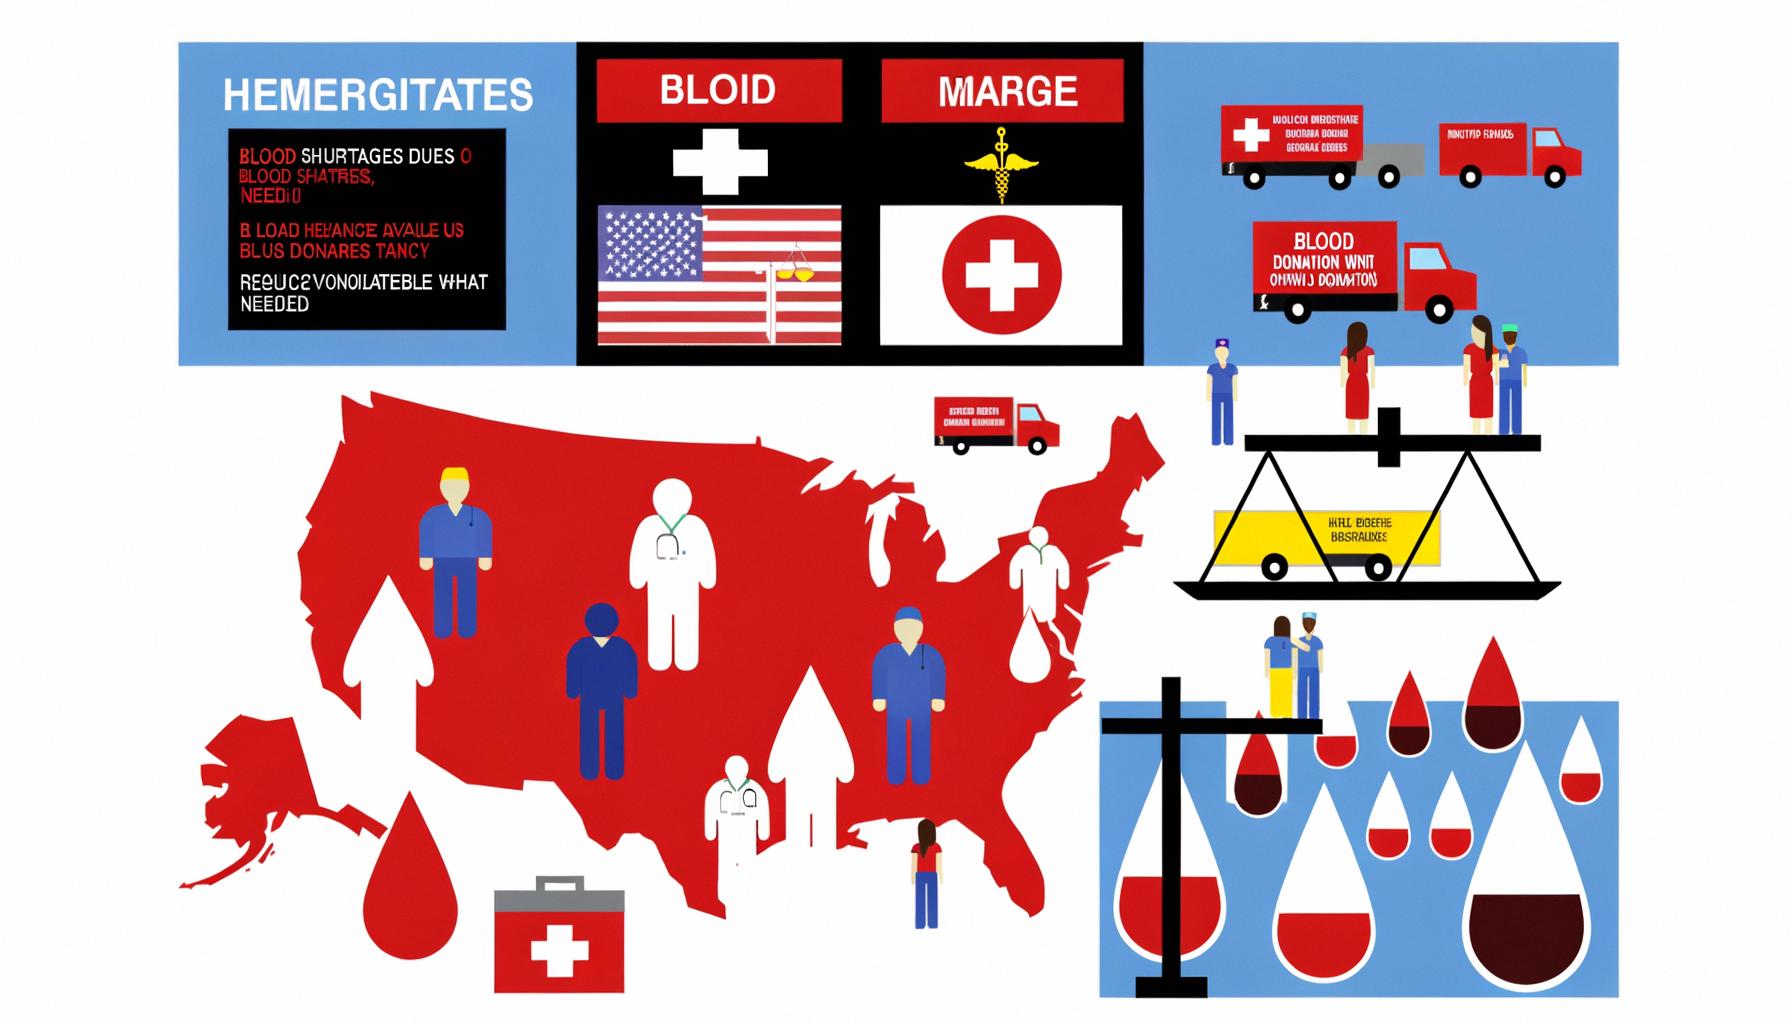 Urgent blood shortages across U.S. states call for immediate public donations.